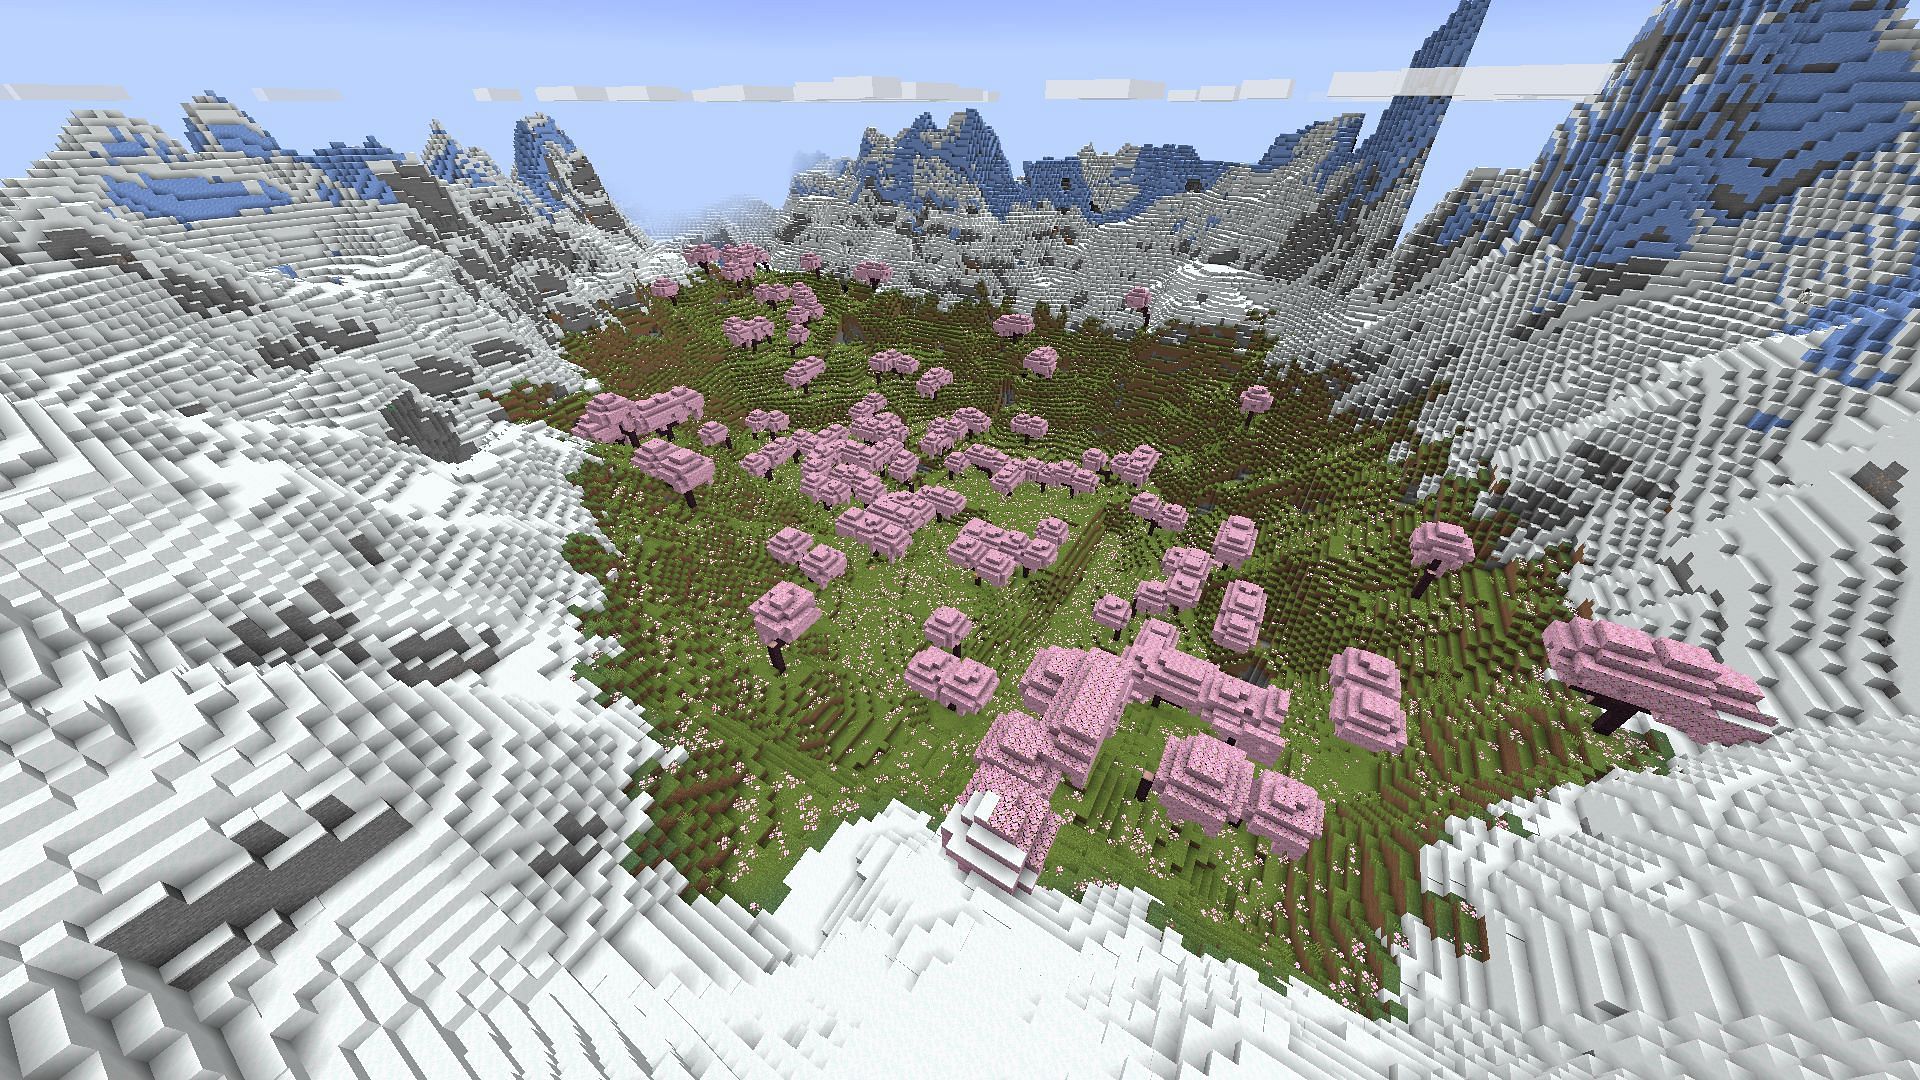 Cherry Grove biome surrounded by tall icy and snowy mountains in Minecraft 1.20.1 (Image via Mojang)